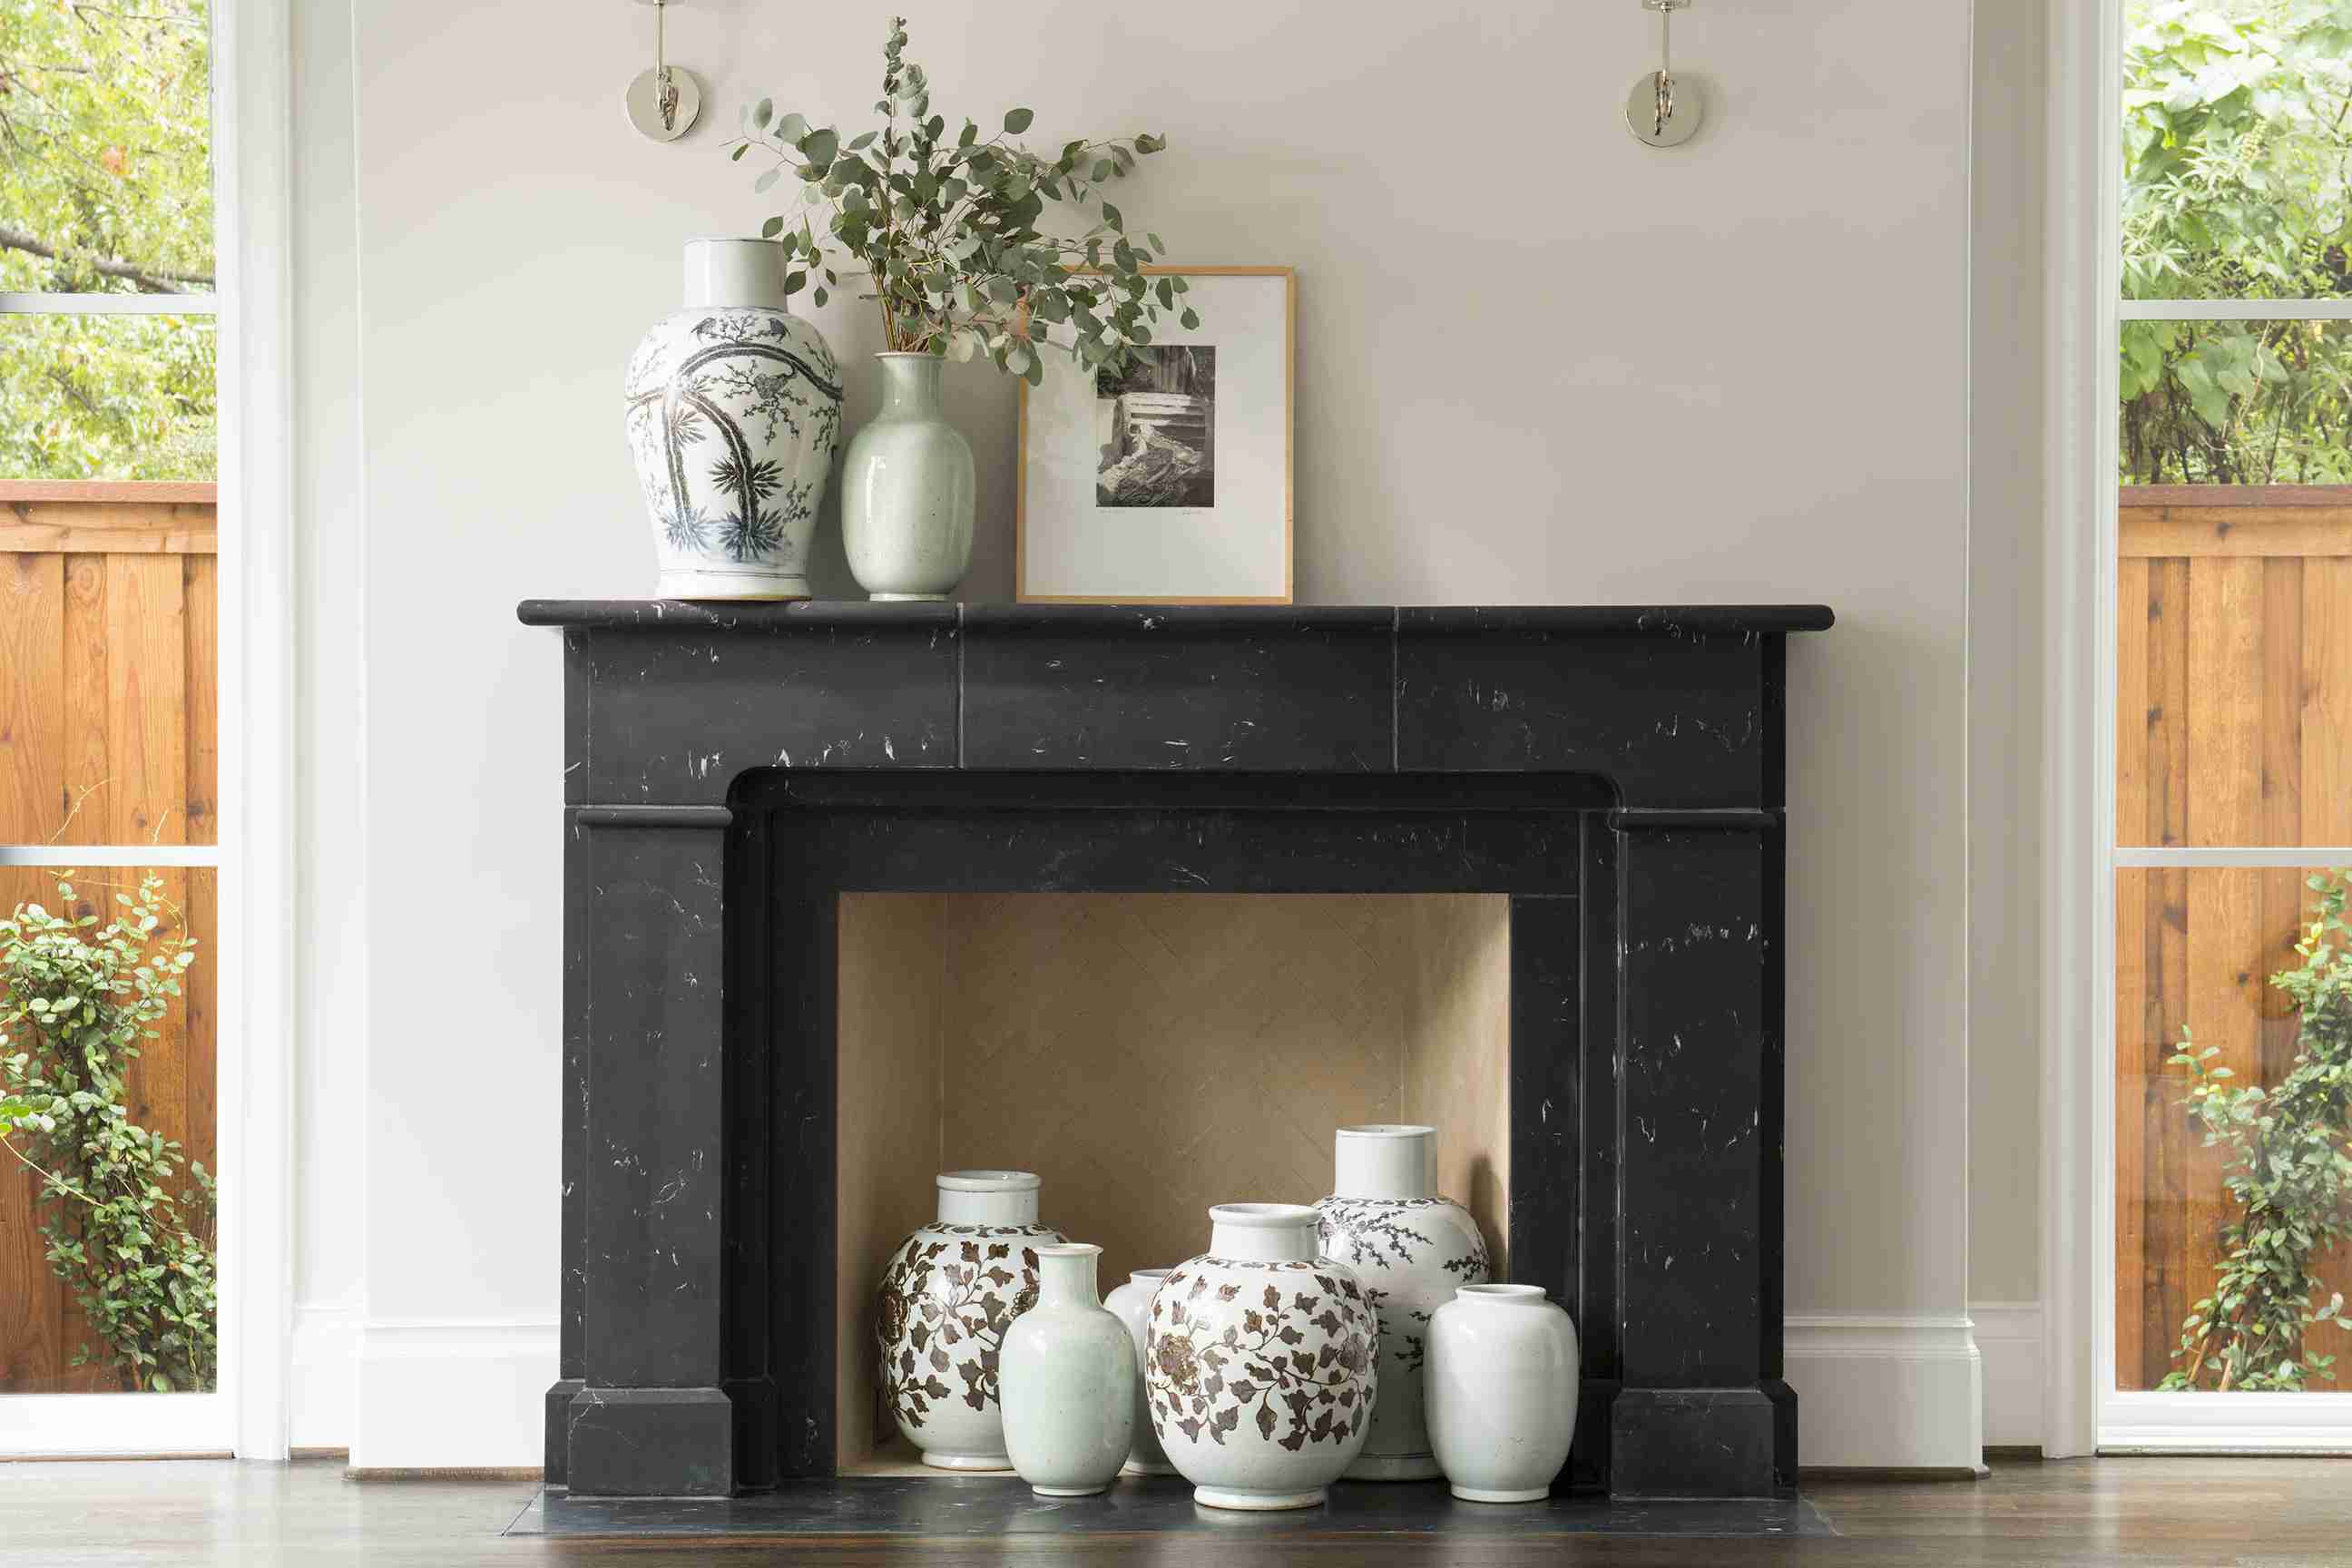 Mirror Over Fireplace Rules Lovely 18 Stylish Mantel Ideas for Your Decorating Inspiration